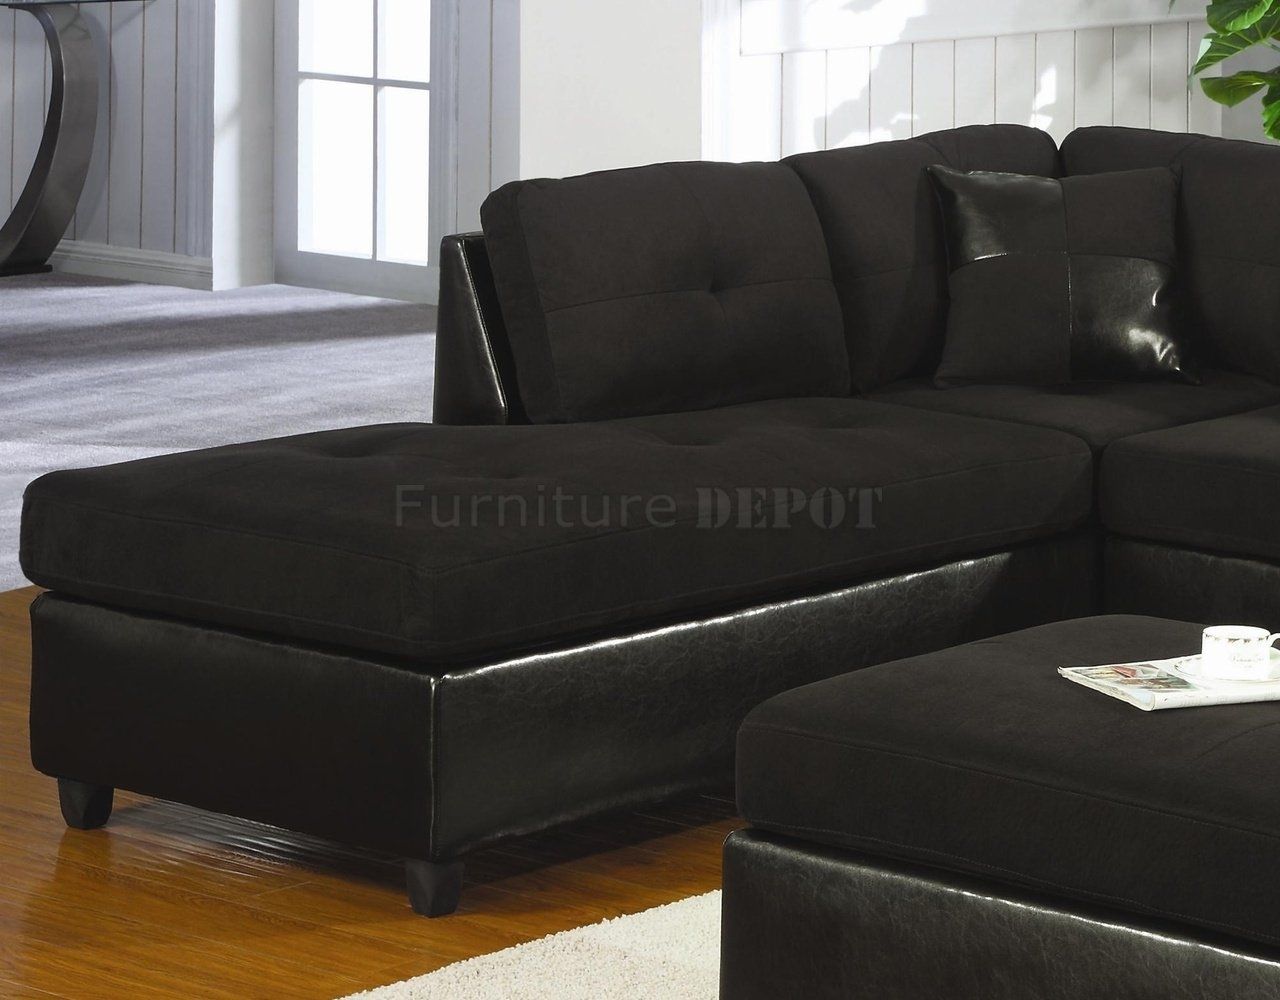 Black Microsuede Couch | Microfiber & Faux Leather Contemporary Regarding Black Sectional Sofas (View 3 of 15)